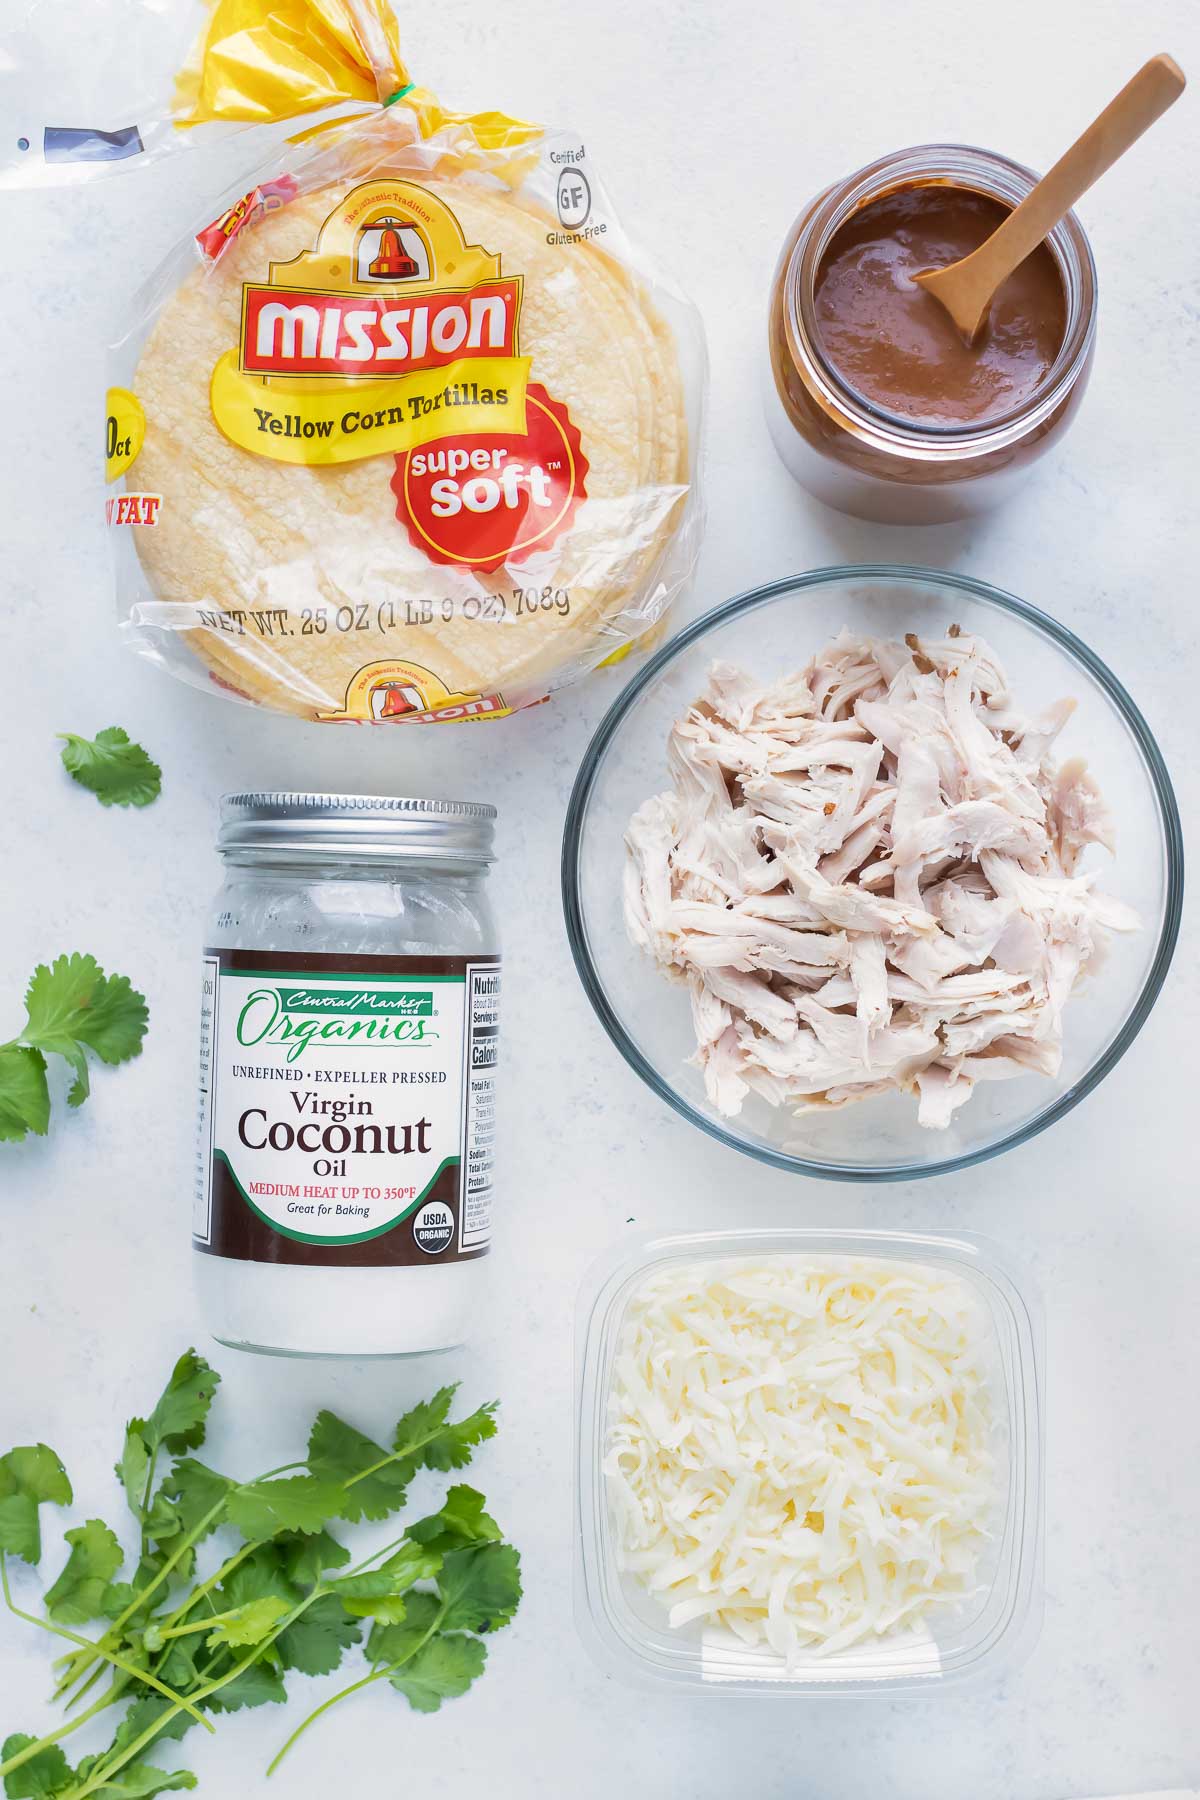 Coconut oil, chicken, corn tortillas, mole sauce, cheese, and cilantro are the ingredients for this recipe.